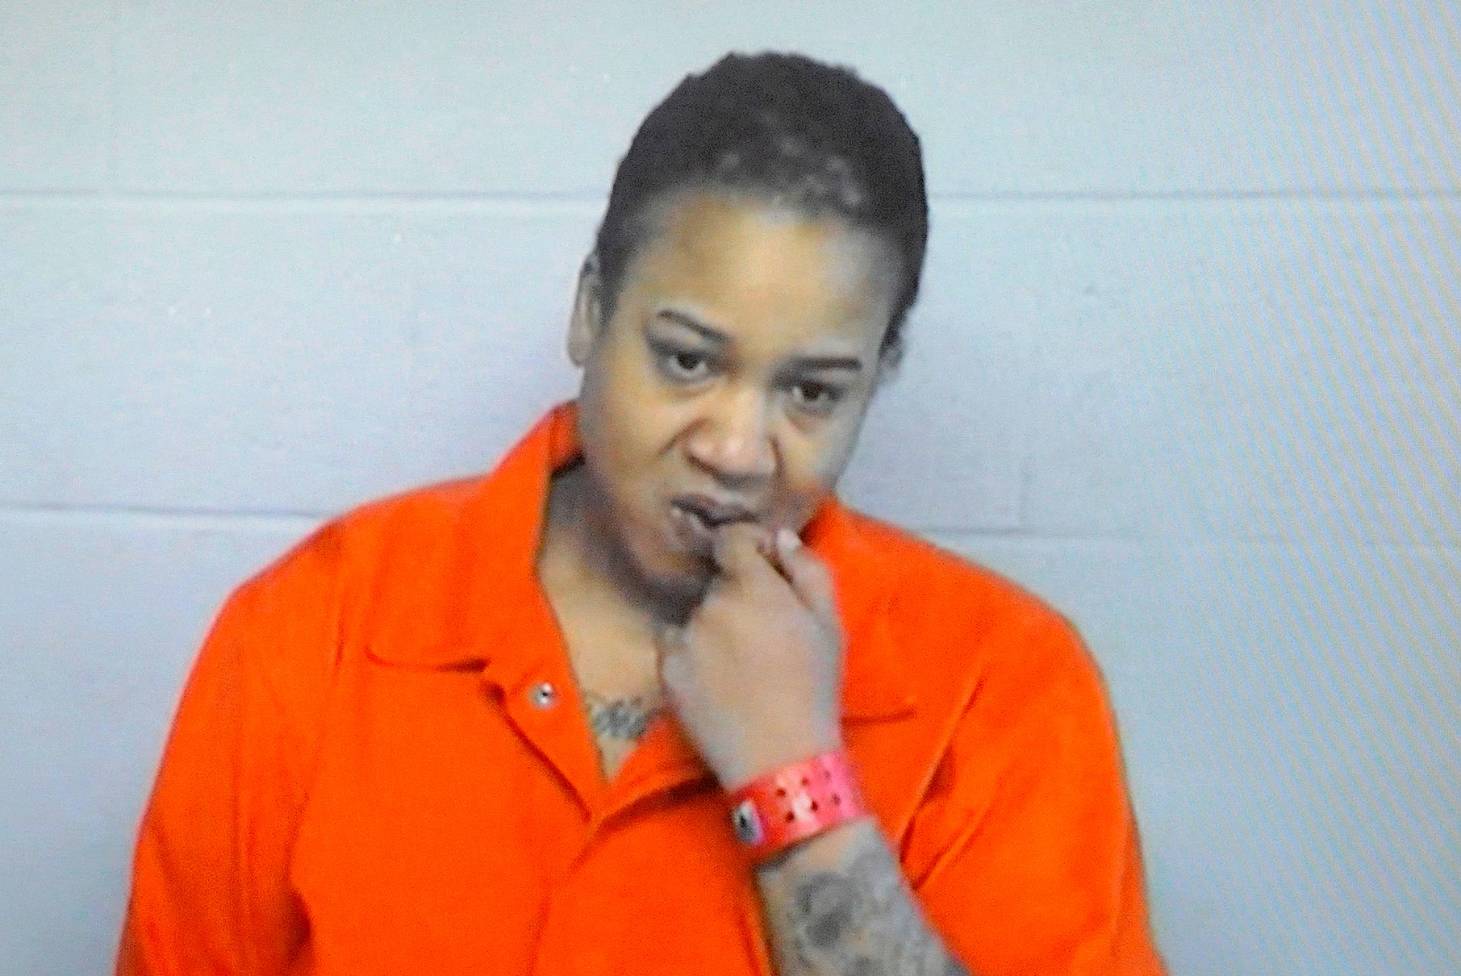 Mitchelle Blair, The Woman That Killed Her Children And Put Them In A Freezer For 3 Years